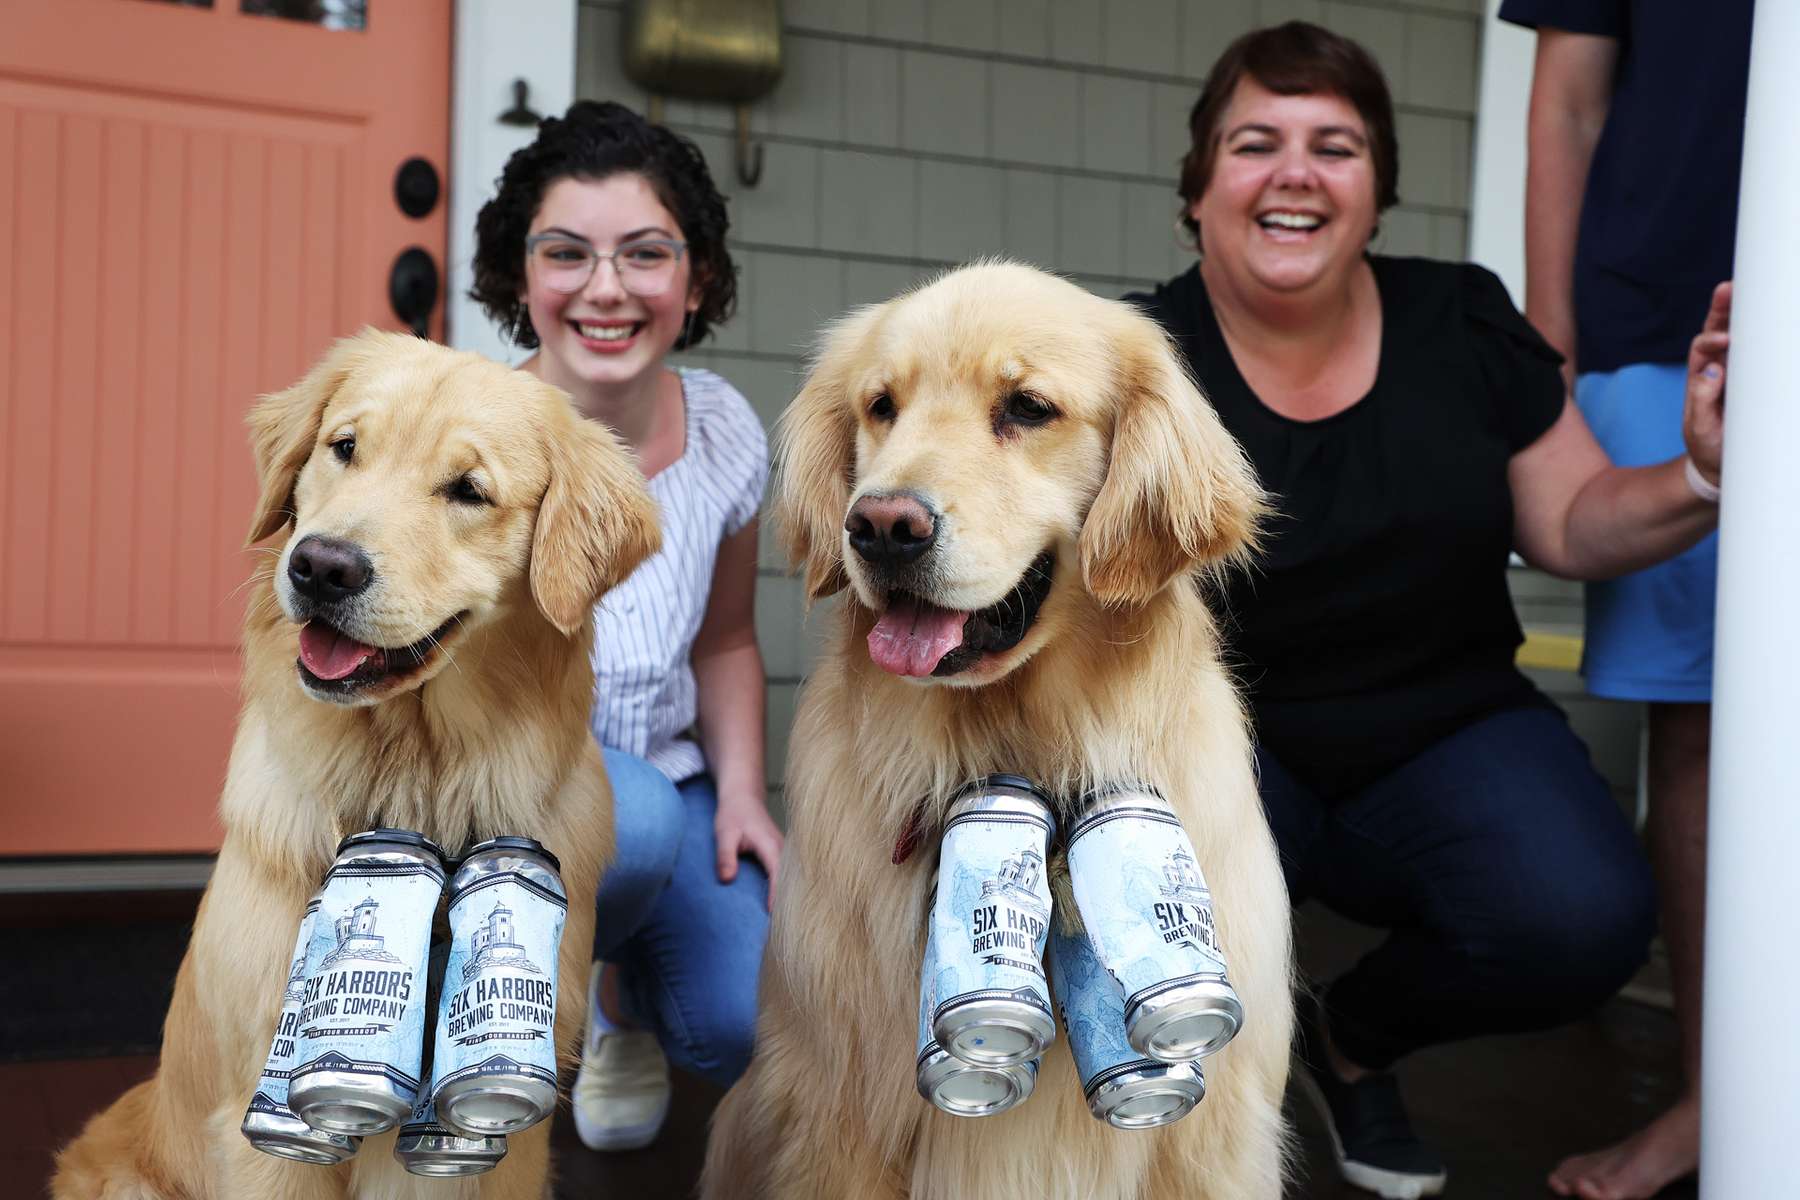 Lisa Fascilla, with children Nina and Alex  receive a beer delivery from Karen and Mark Heuwetter and their two dogs Buddy and Barley on May 03, 2020 in Huntington Village, New York.  Mark and Karen Heuwetter own the Six Harbors Brewery and have trained their two Golden Retrievers Buddy and Barley to help them deliver beer to their customers during the coronavirus COVID-19 pandemic.  The dogs are fitted with a four pack of empty beer cans around their necks and meet customers at their doorstep while Mark and Karen carry the beer to deliver behind them.  It has been comforting for the dogs who are enjoying the exercise and meeting people along the way.  The customers love seeing Buddy and Barley and enjoy petting and greeting them to go with their beer delivery. 